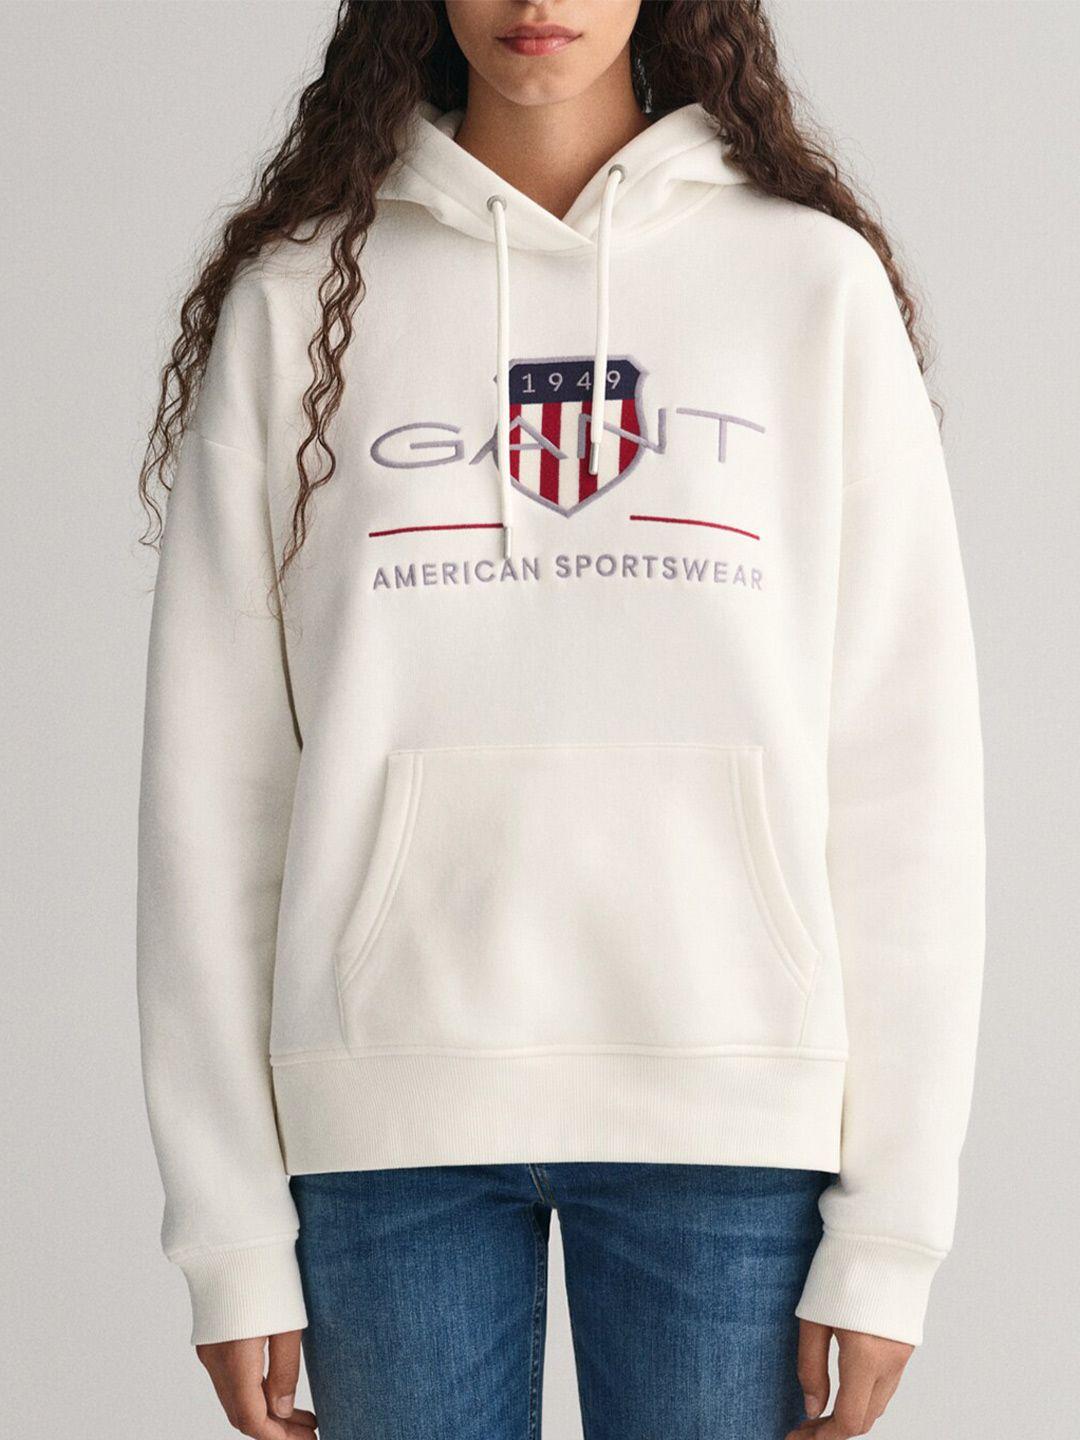 gant embroidered hooded pullover